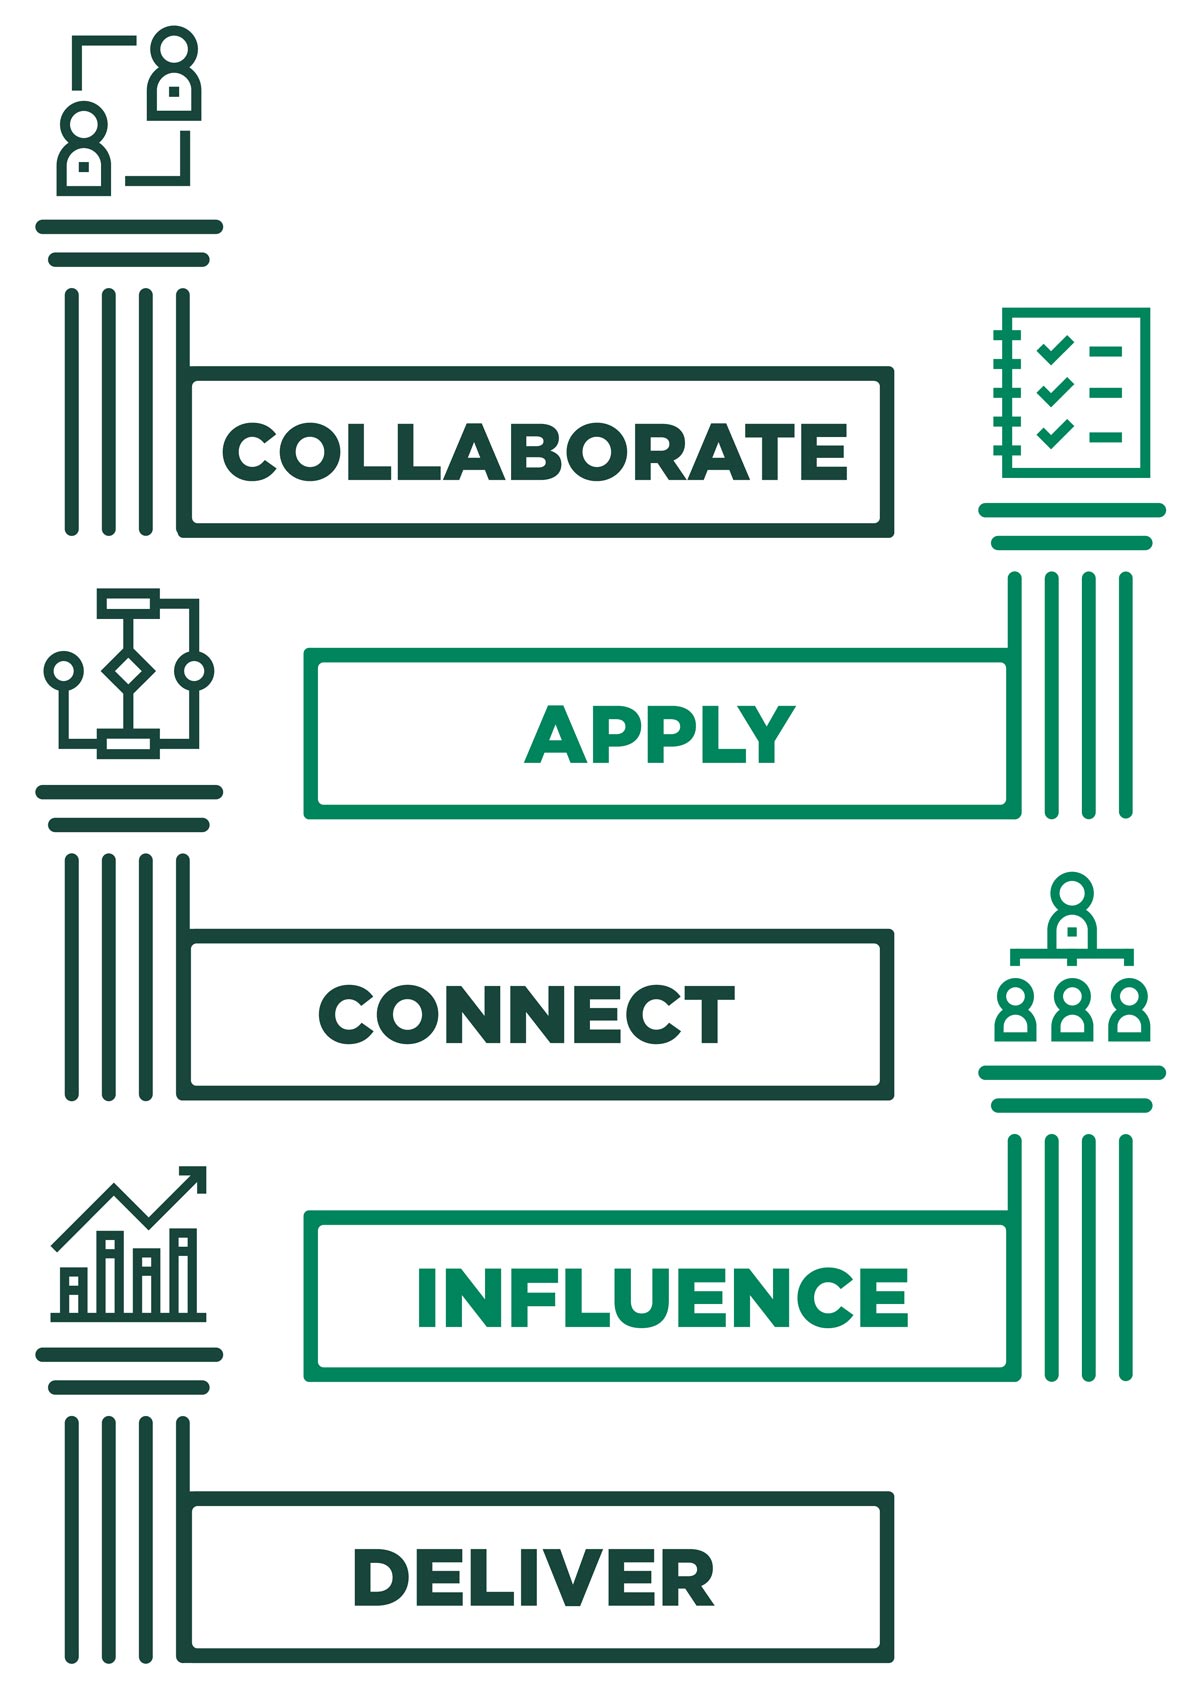 Collaborate, Apply, Connect, Influence, Deliver graphic